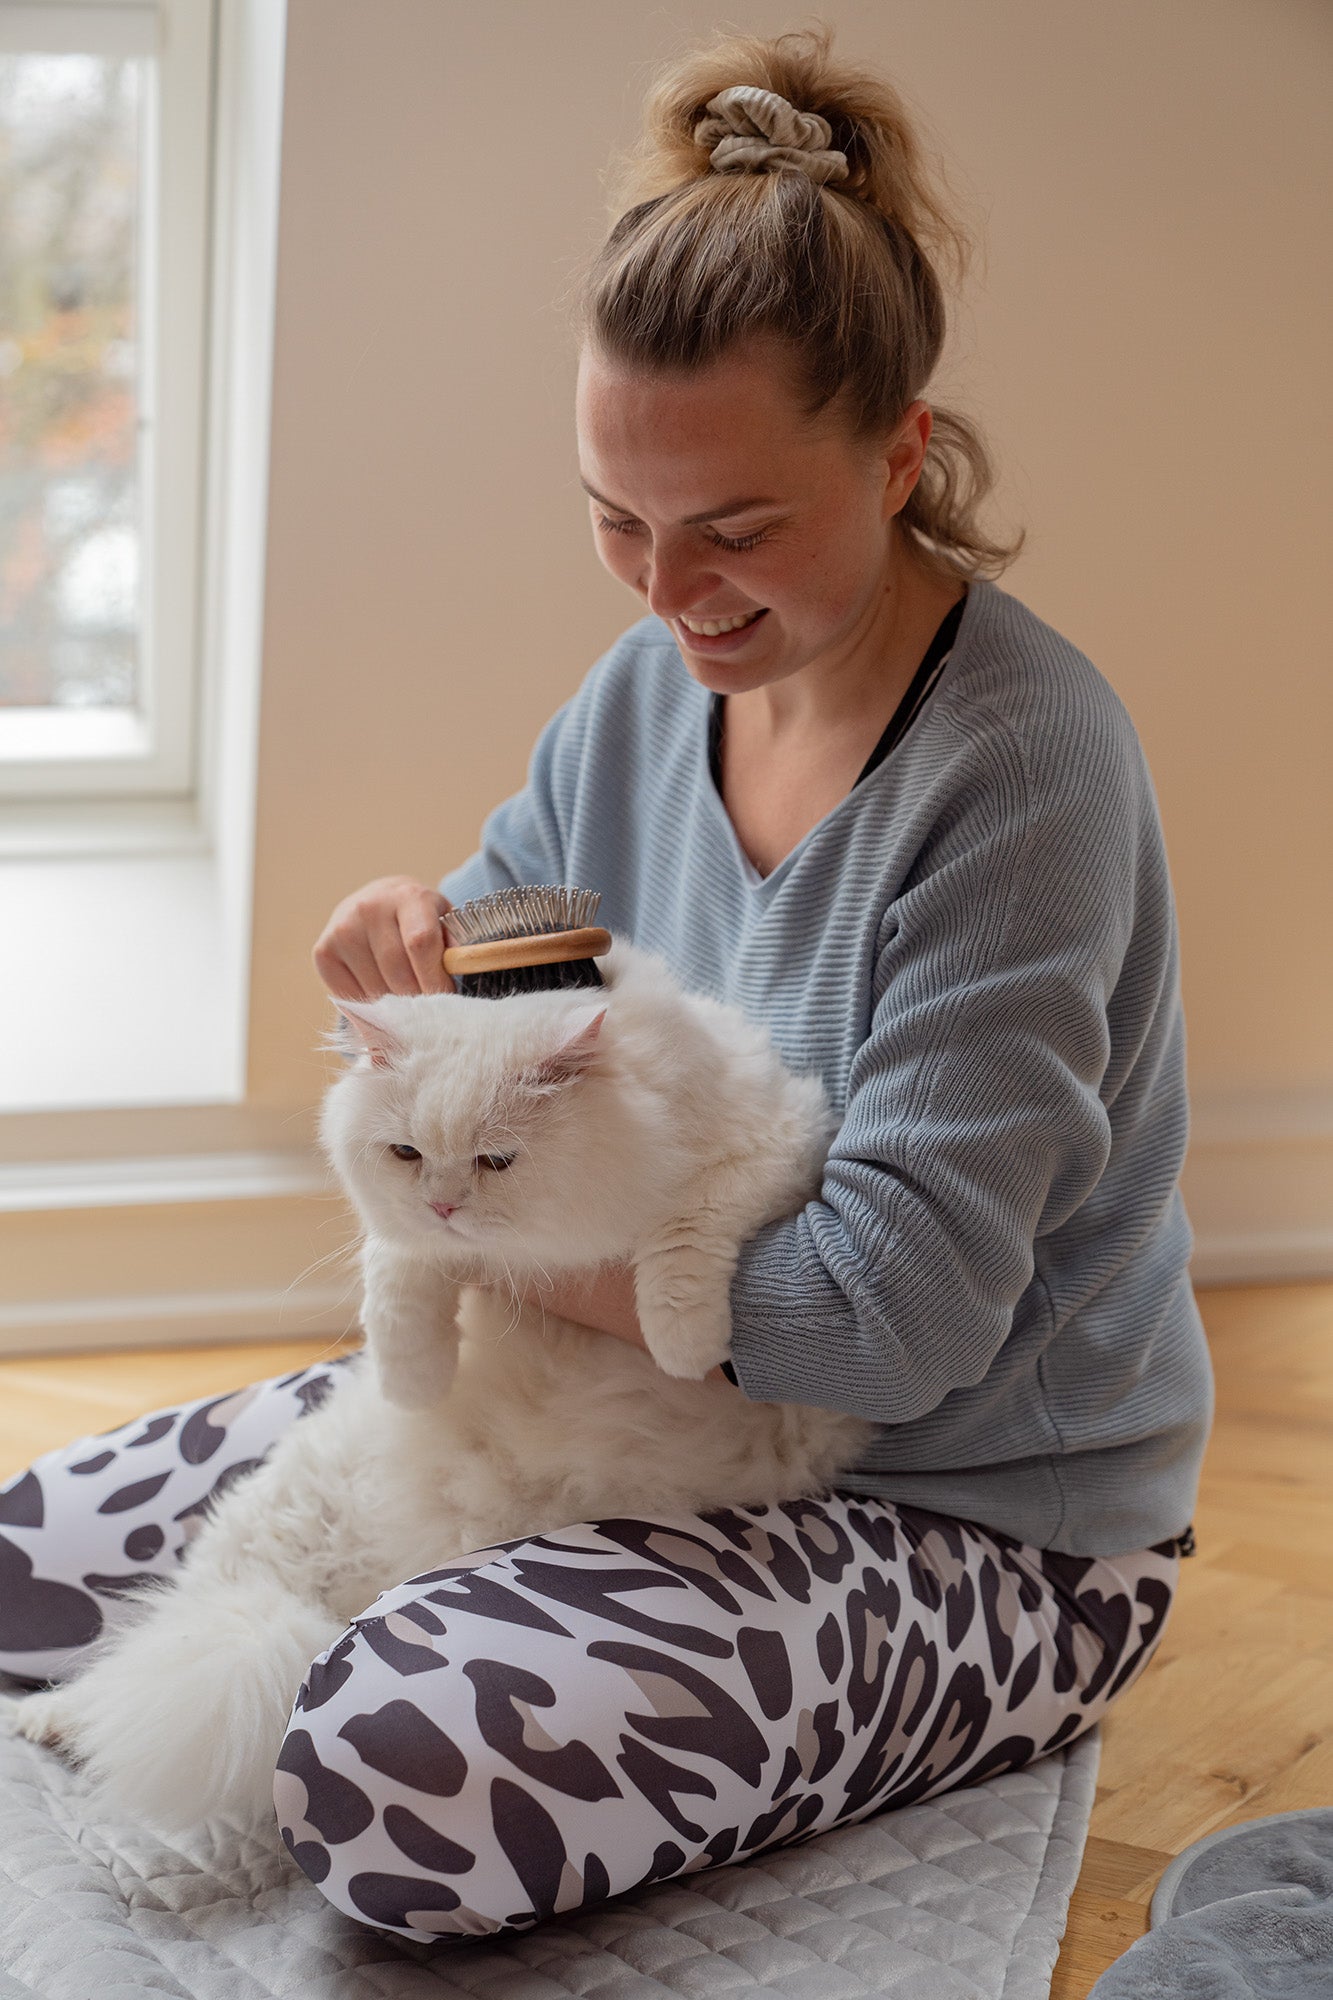 Long haired cat being brushed